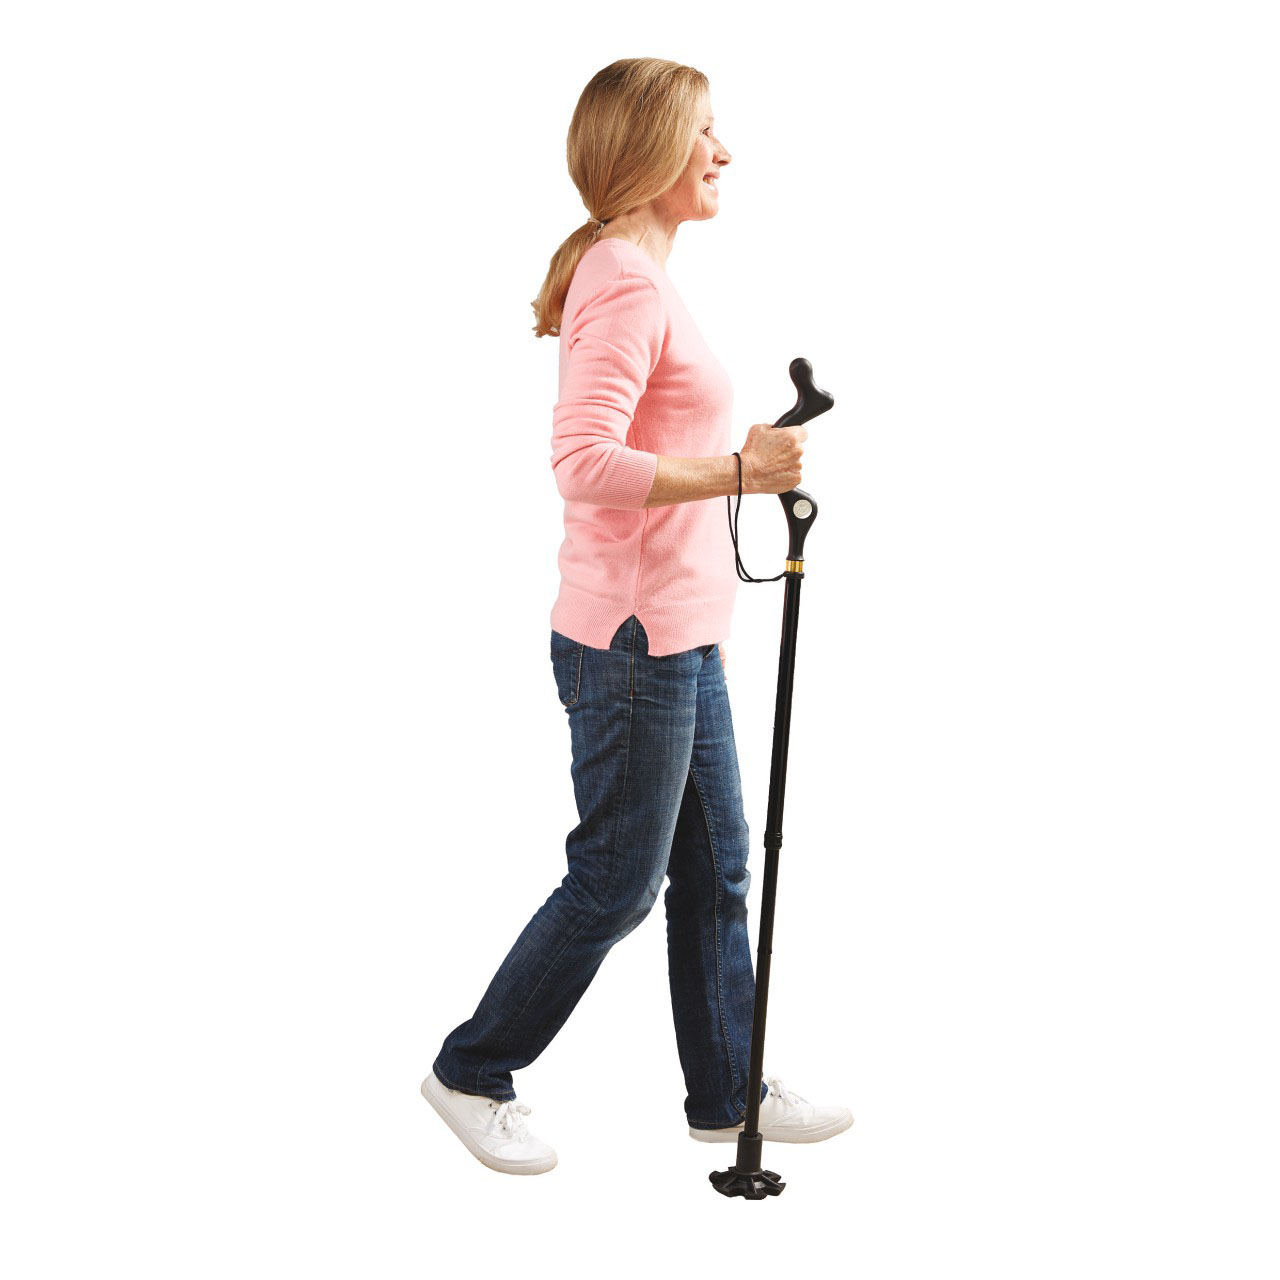 Walking Cane For the Gents: Navigating The Different Cane Options for